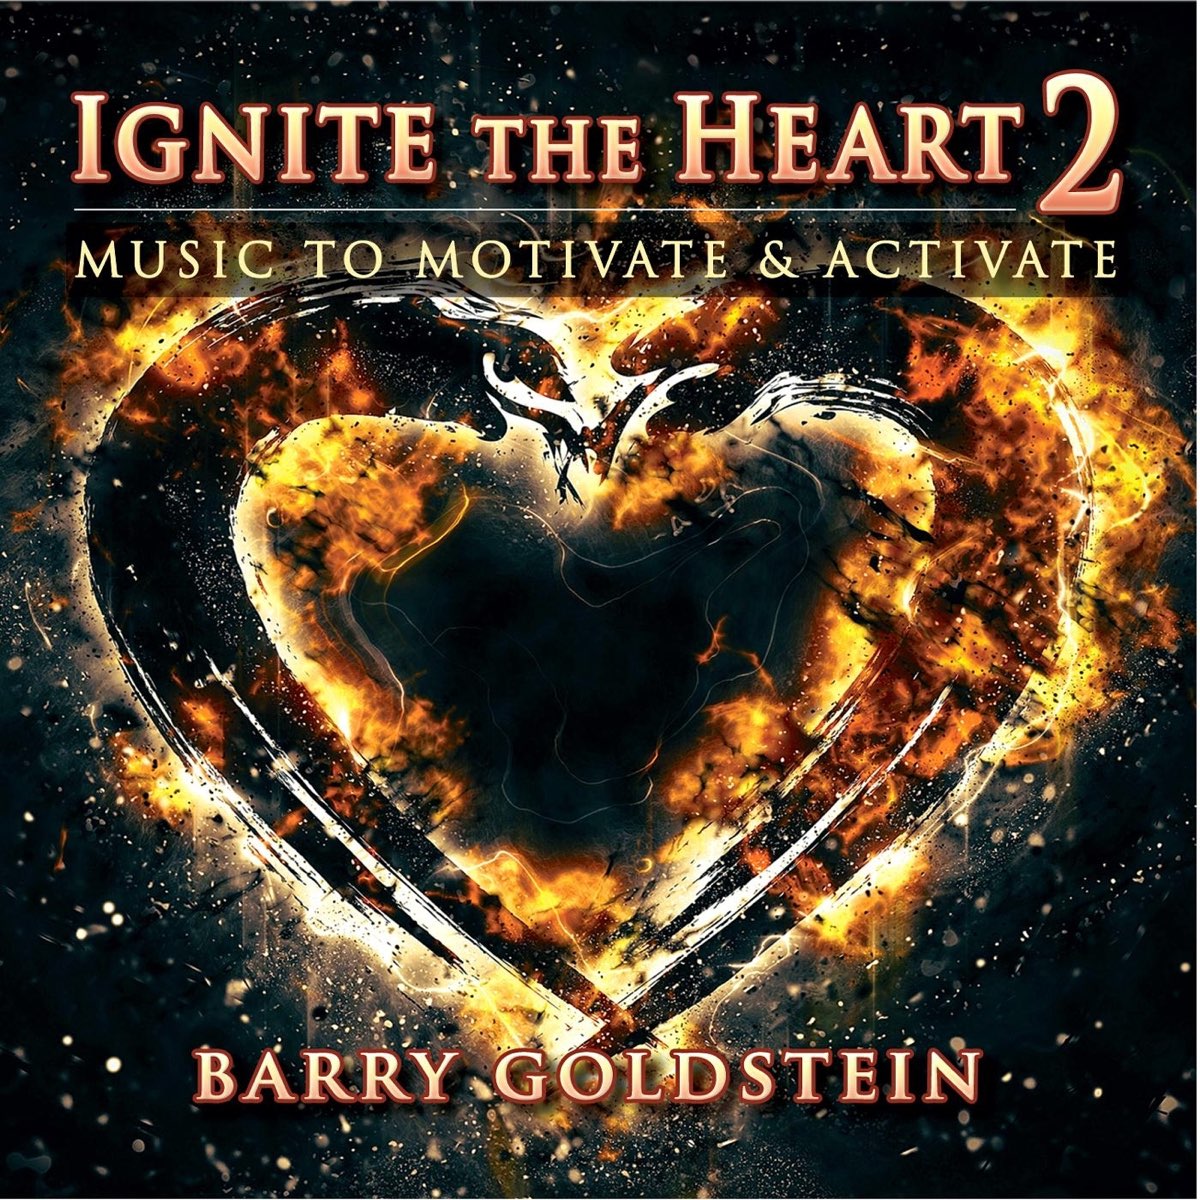 Barry Goldstein – Ignite the Heart 2